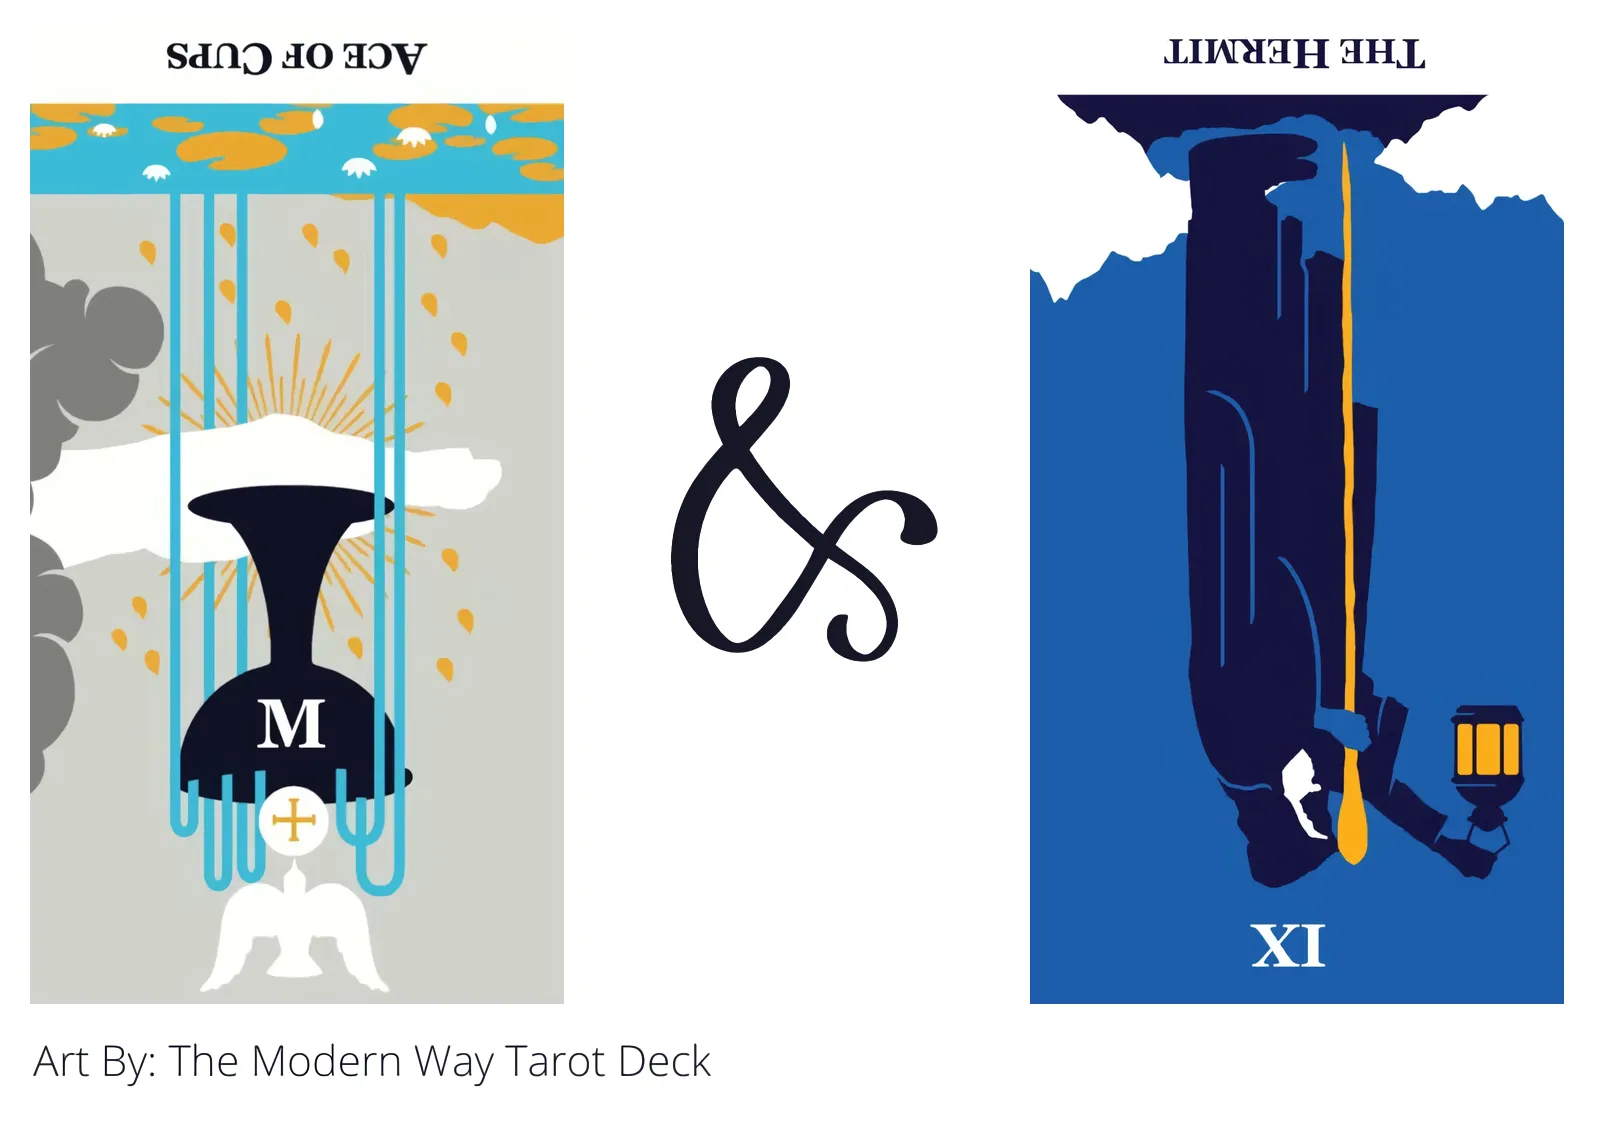 ace of cups reversed and the hermit reversed tarot cards together